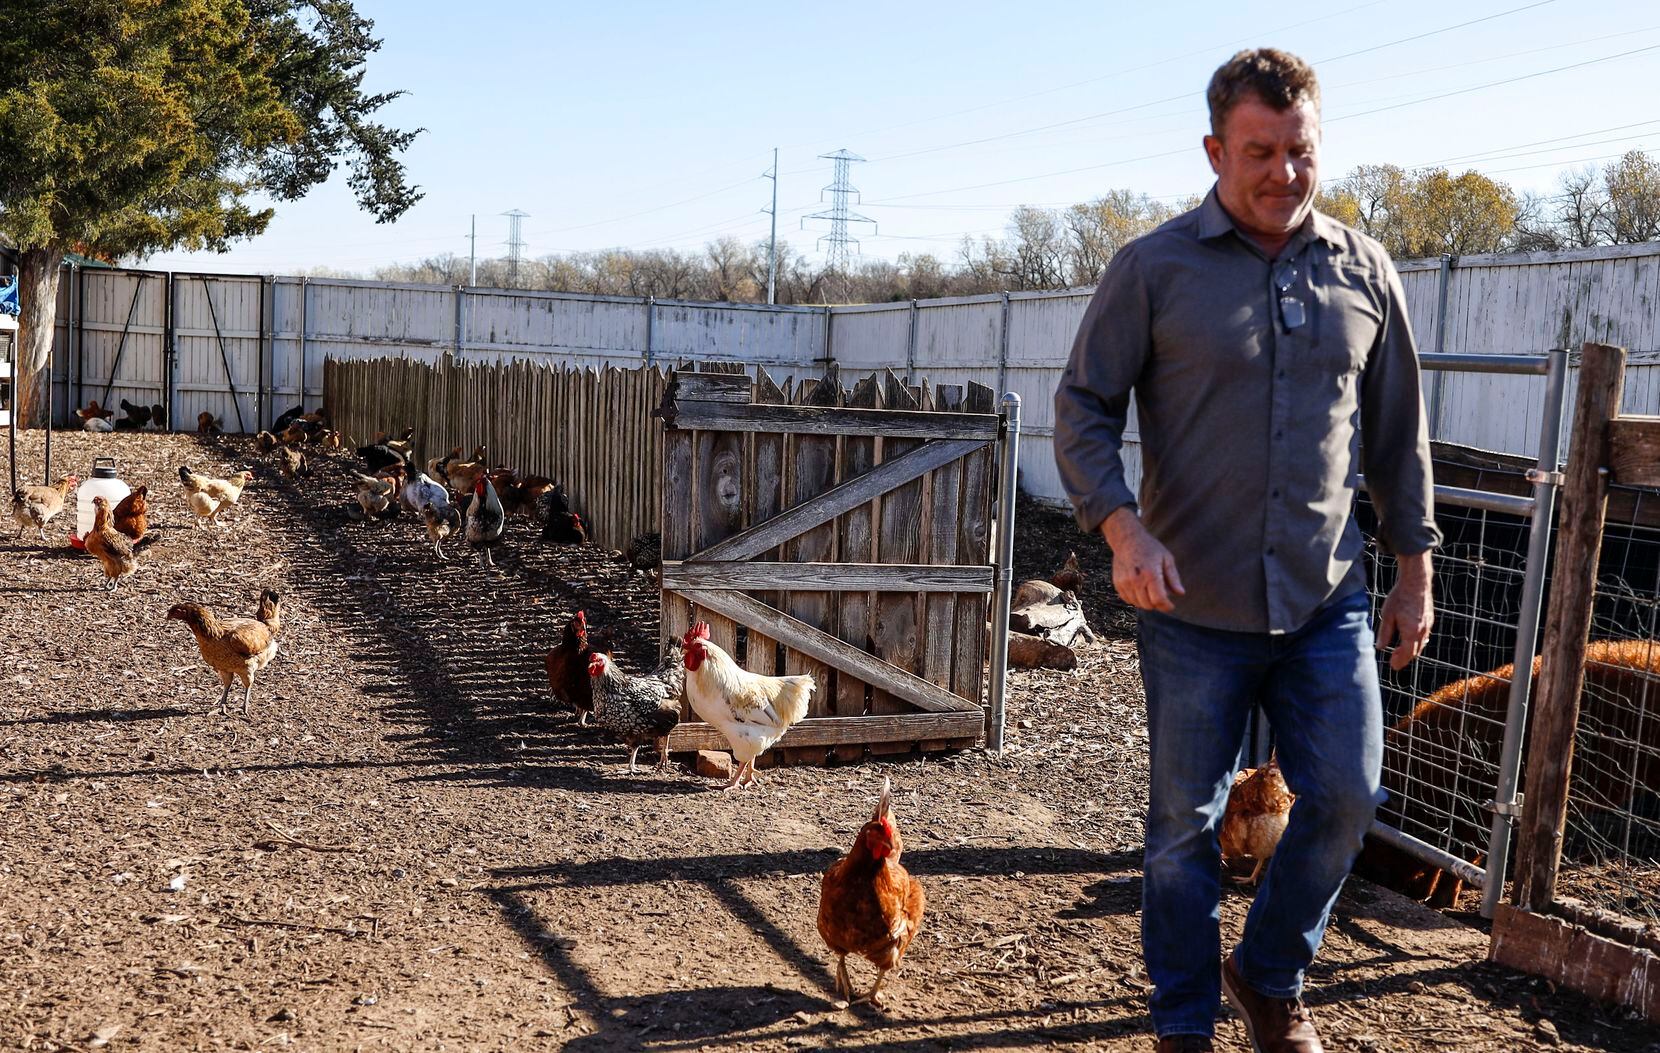 Daron Babcock leaves his pig, Libby, in a pen while chickens roam at Bonton Farms in South...